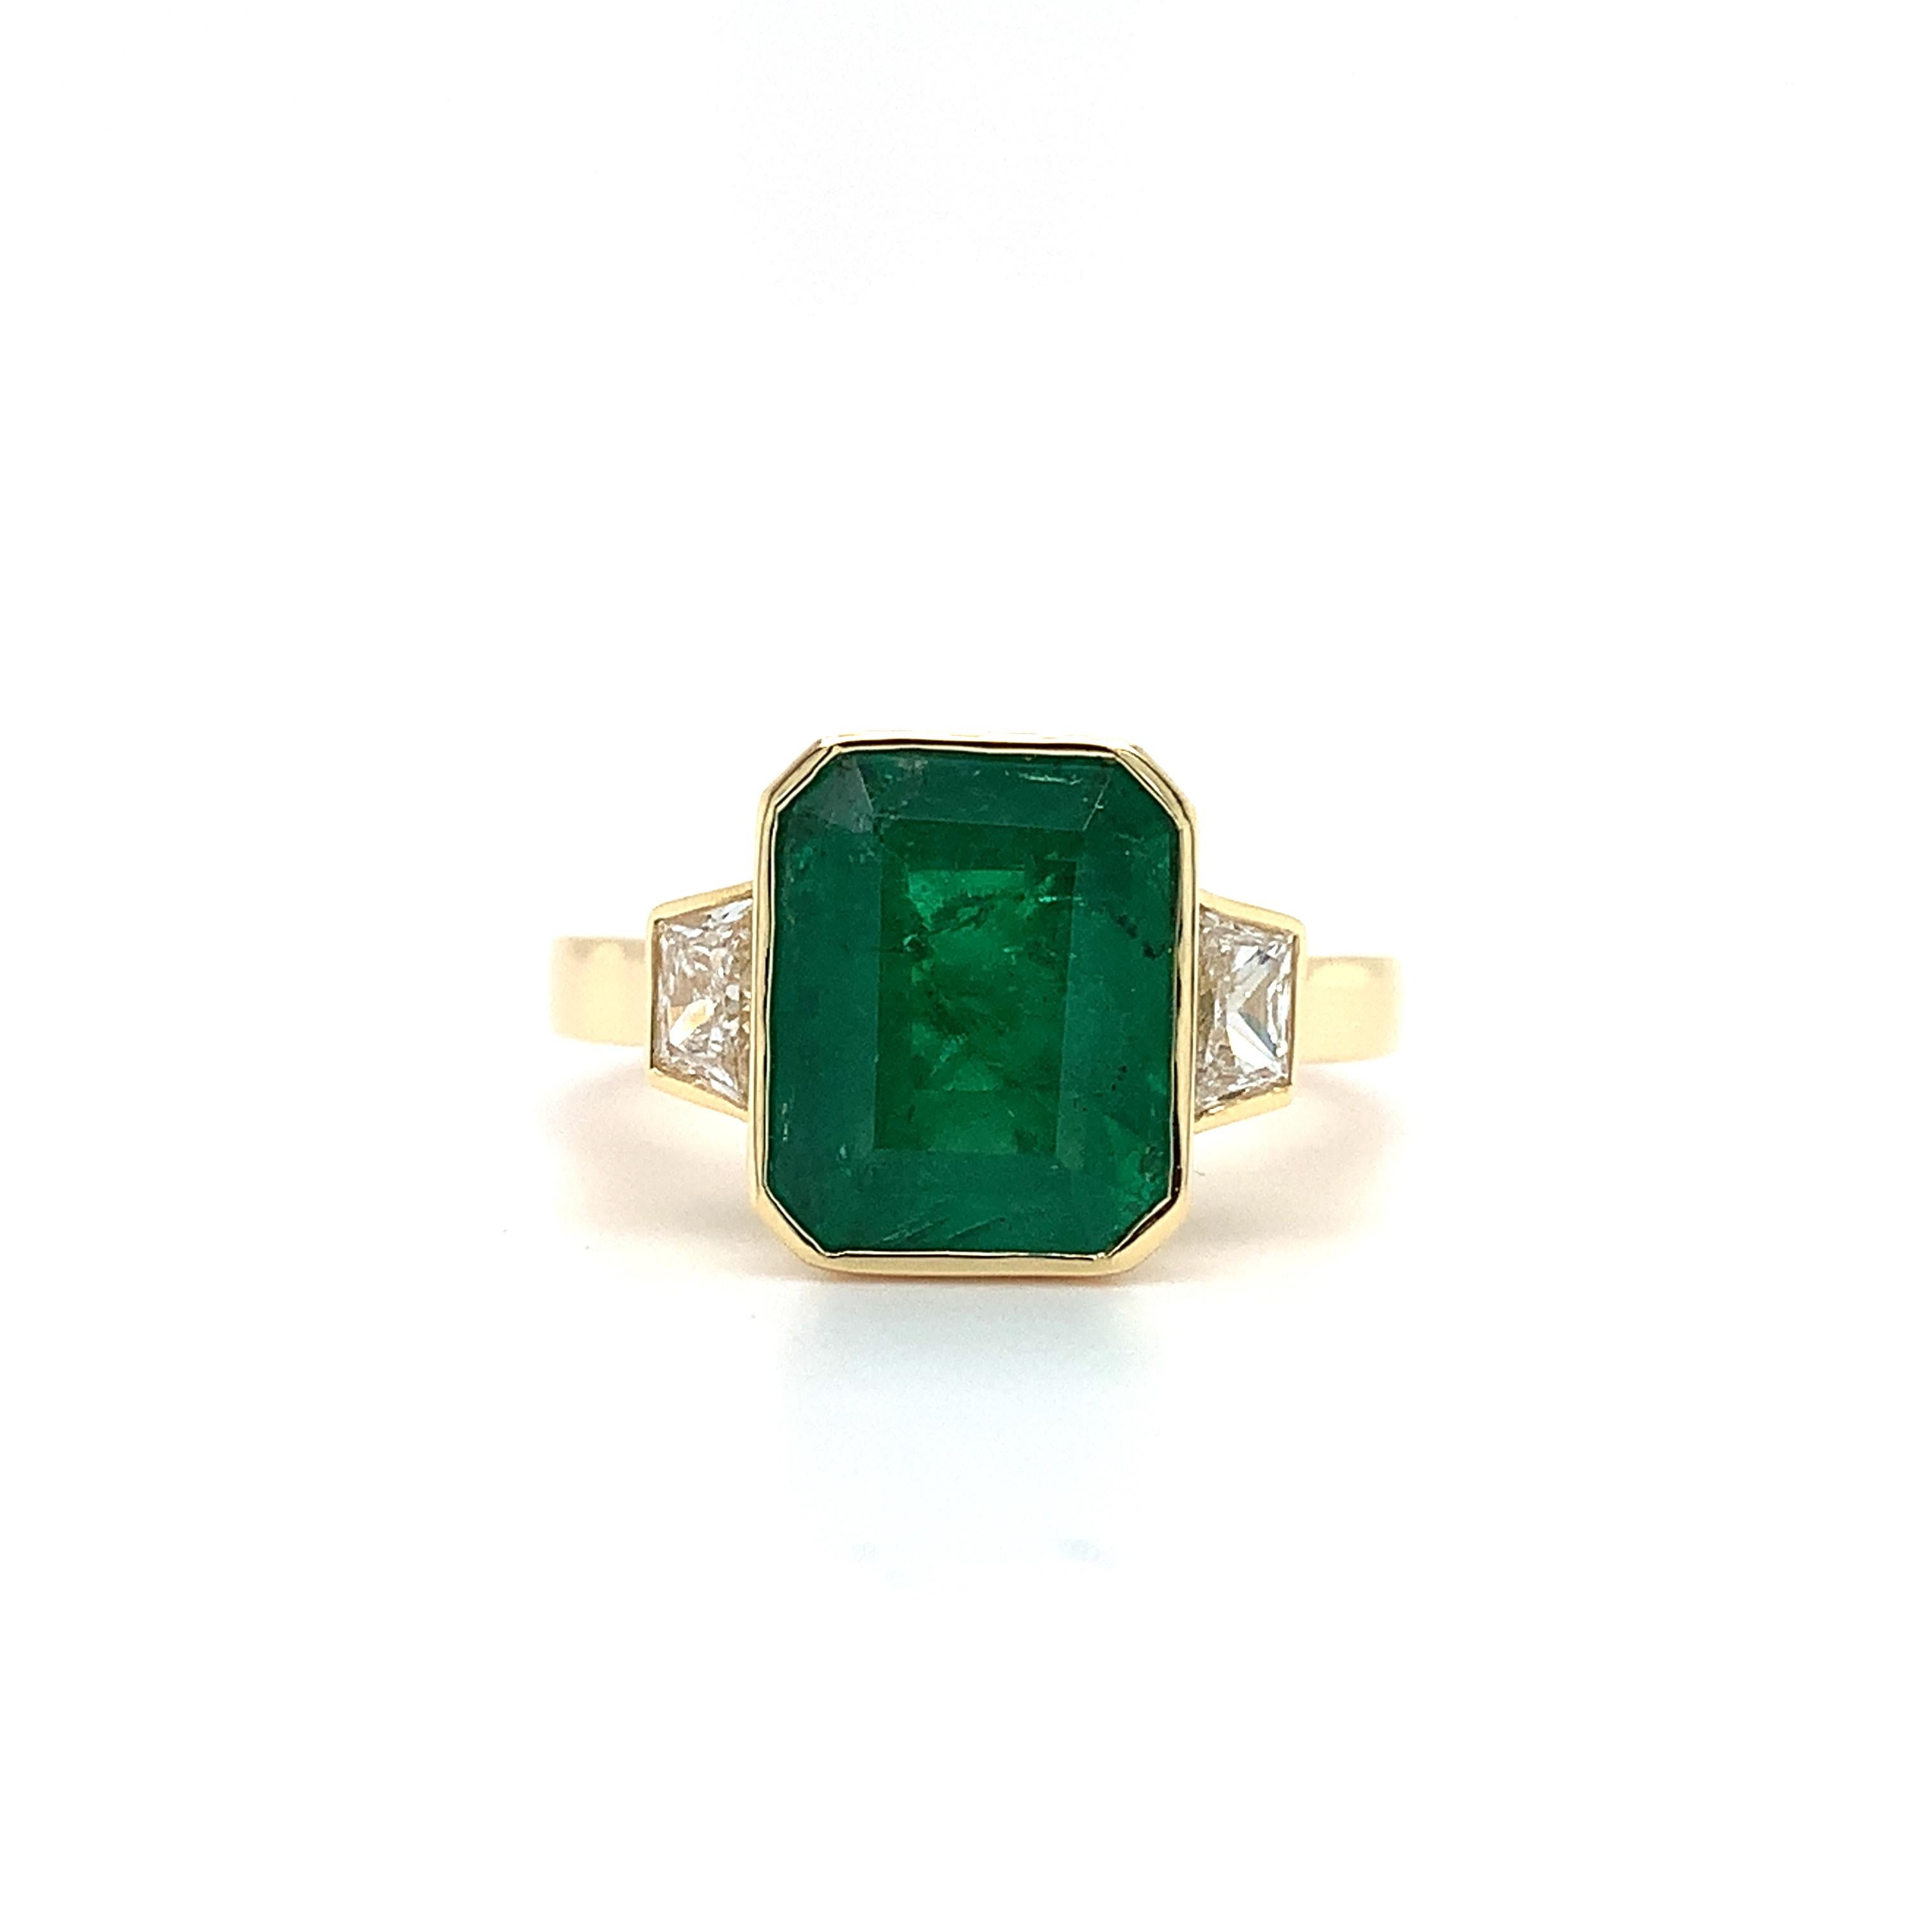 Green emerald and diamond trilogy cocktail ring 18 yellow gold
Green emerald natural gemstone emerald shaped total weight approximately 3.50ct 
Diamond step cut total weight 0.80ct F colour VS1 clarity
The ring can be resized
Ring size